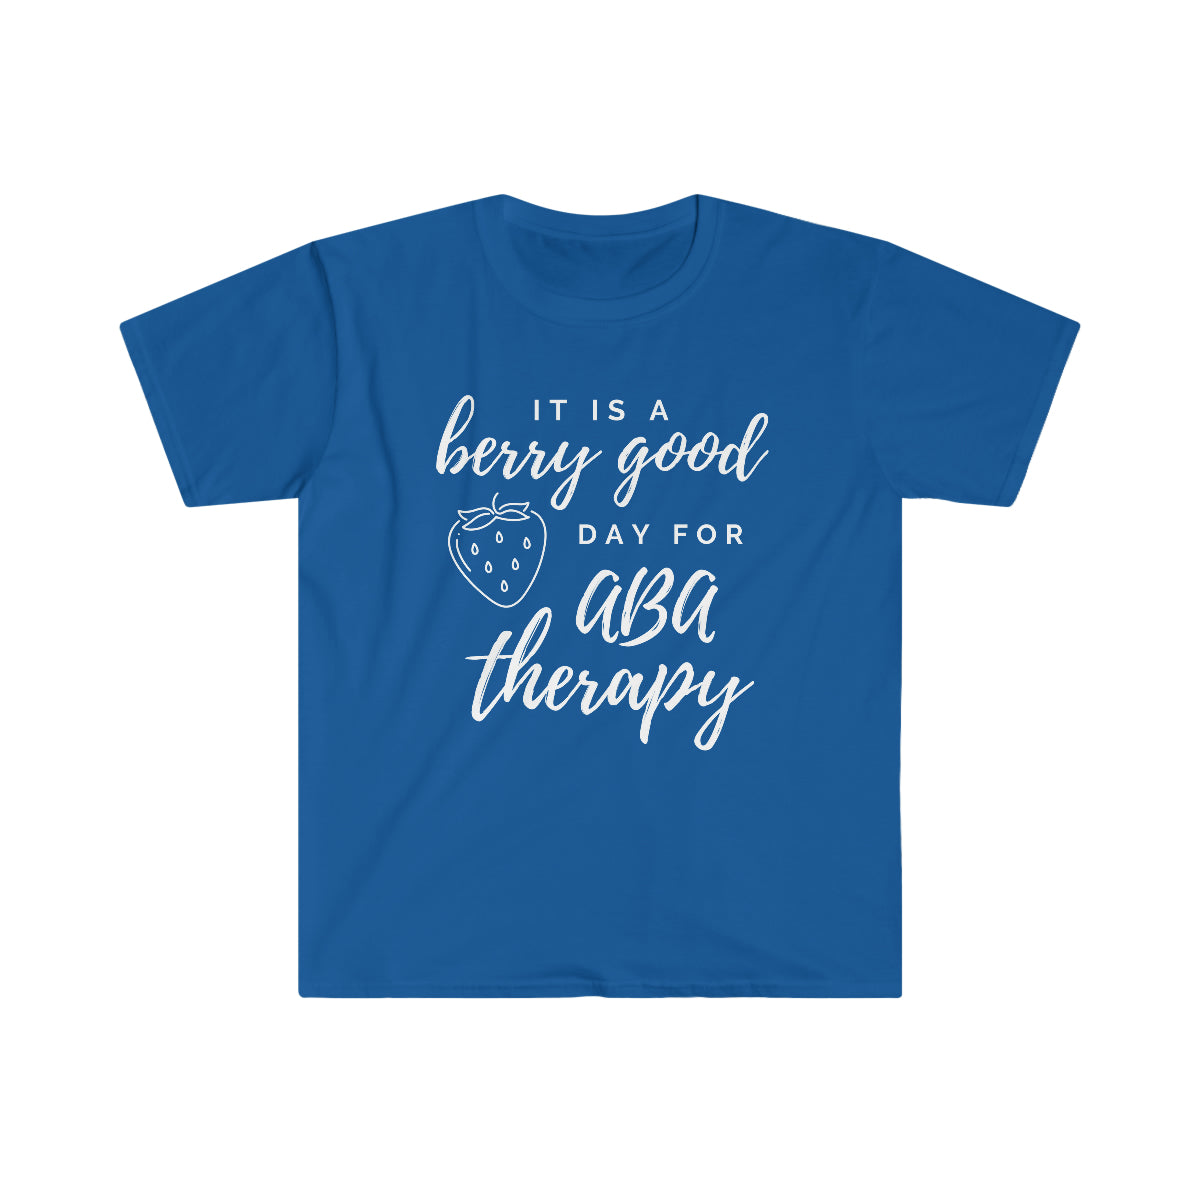 aba gift, Bcba gifts, autism shirt, aba therapist shirt, aba shirts, aba  therapist gifts, behavior analyst gift applied